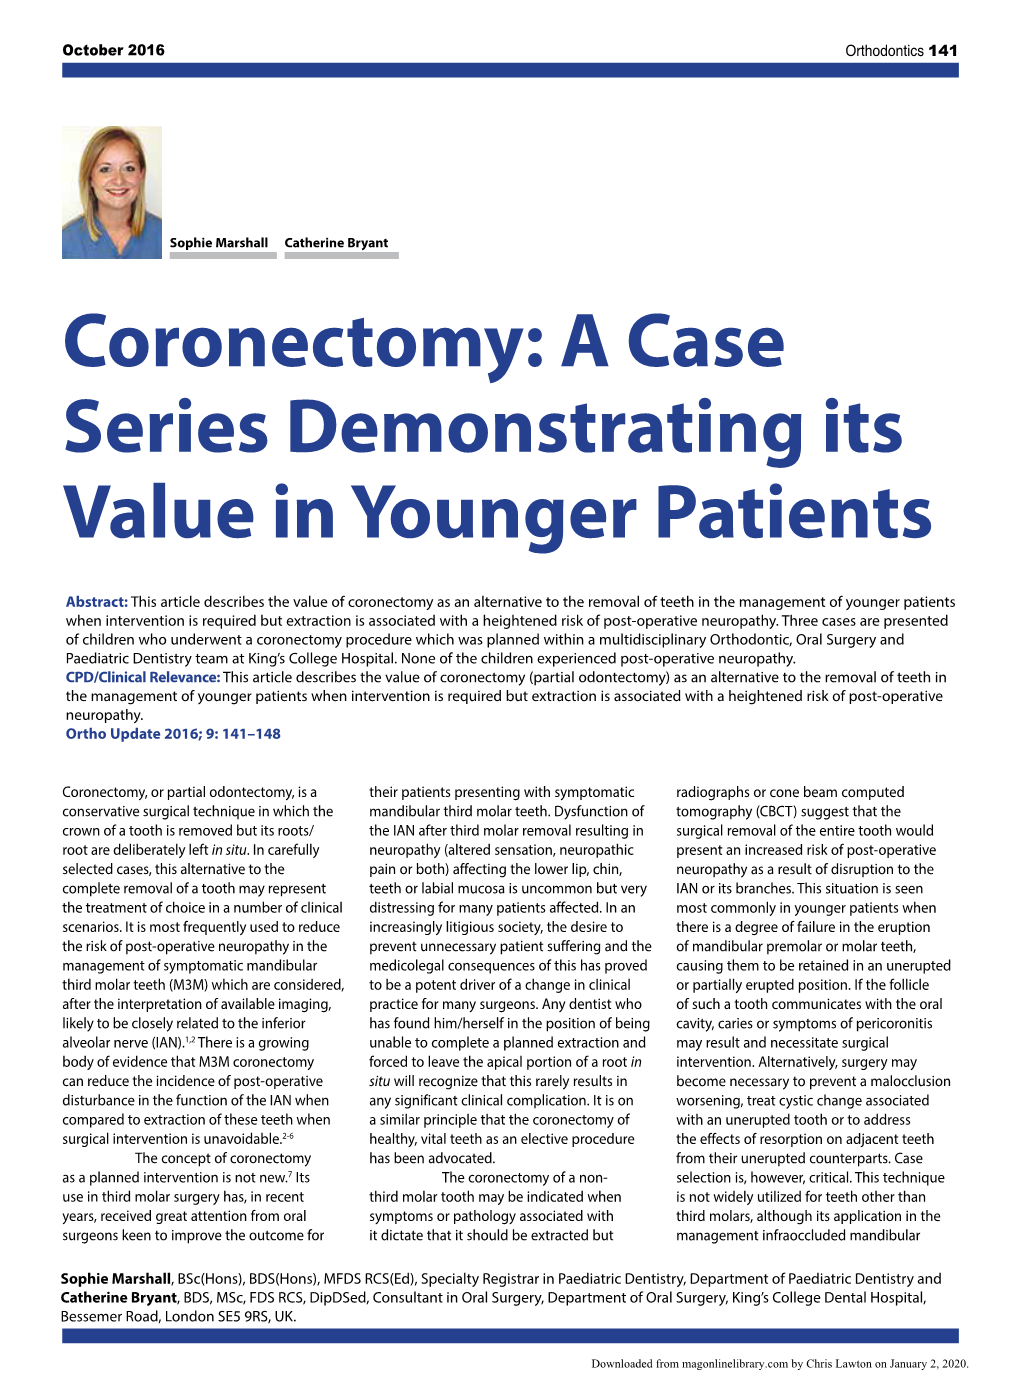 Coronectomy: a Case Series Demonstrating Its Value in Younger Patients